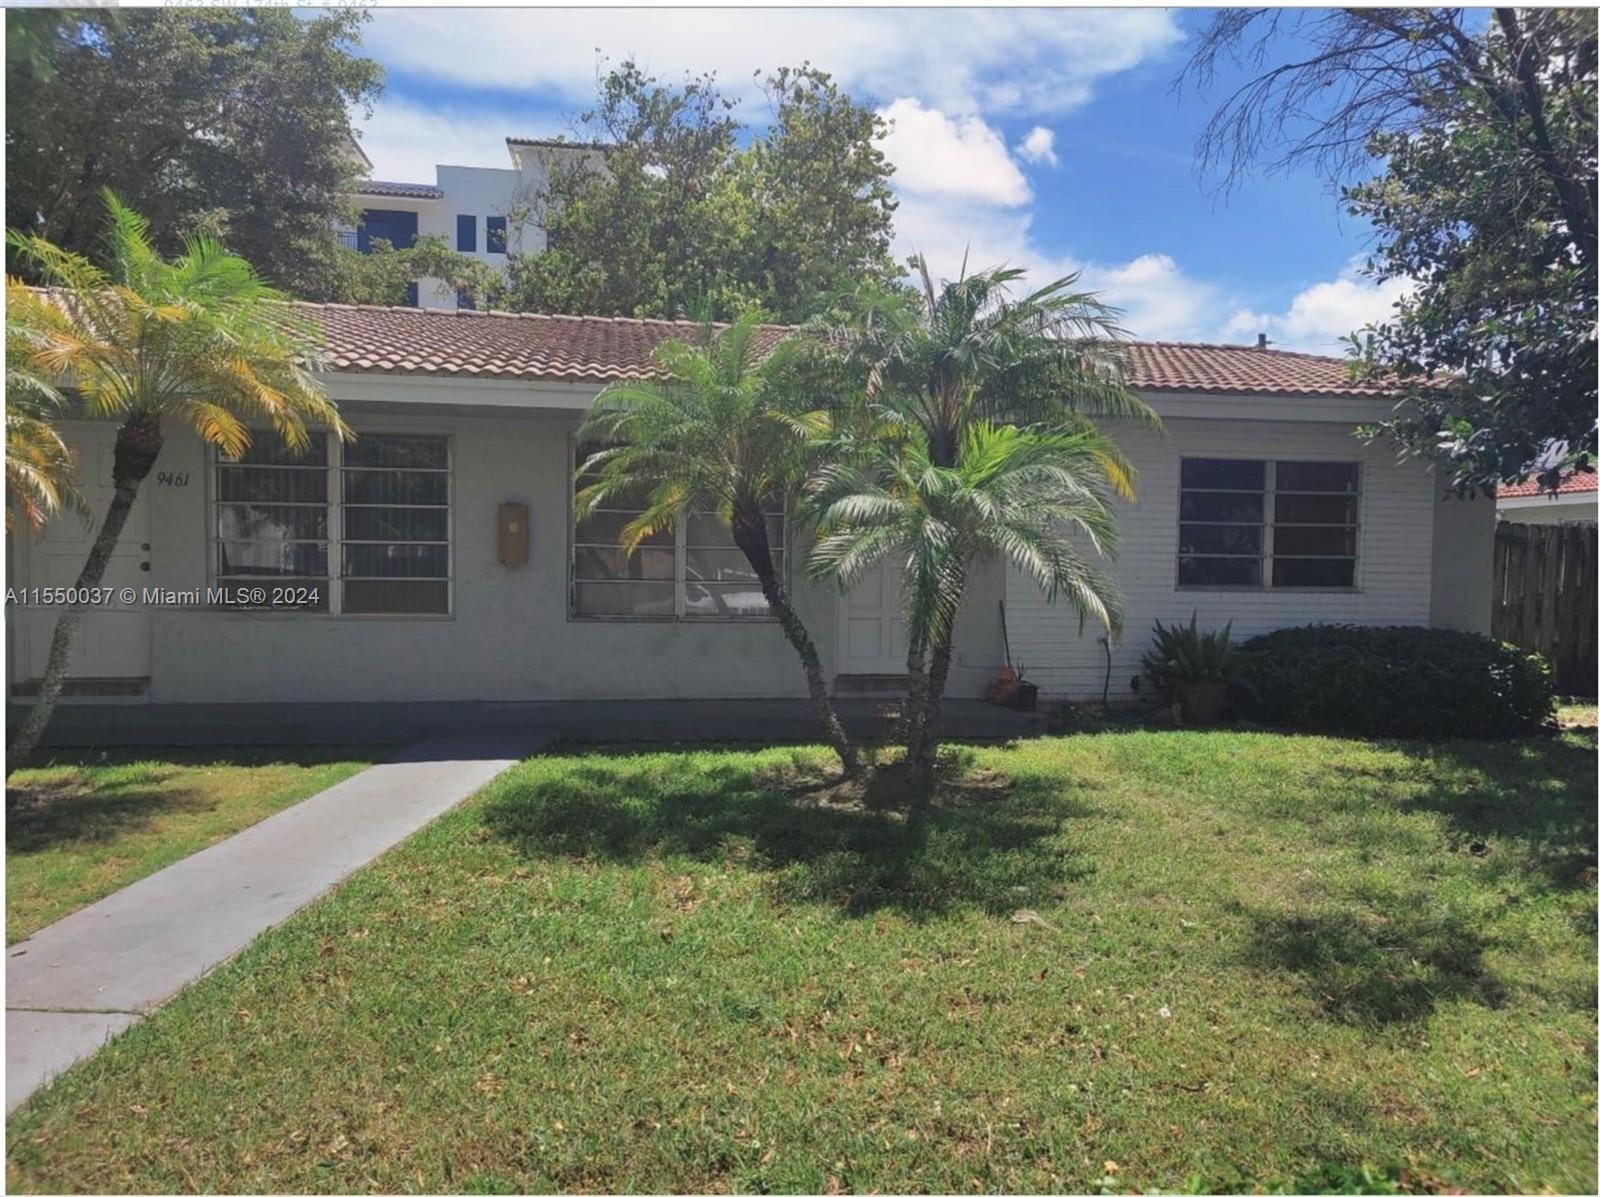 Adorable 2 bedroom, 2 bath villa conveniently located in Palmetto Bay in a gated community with pool. Large, open living area flooded with natural life.  Large bedrooms with plenty of closet space.  Huge backyard, washer dryer inside unit and 2 assigned parking spaces in front of unit.  A must see.